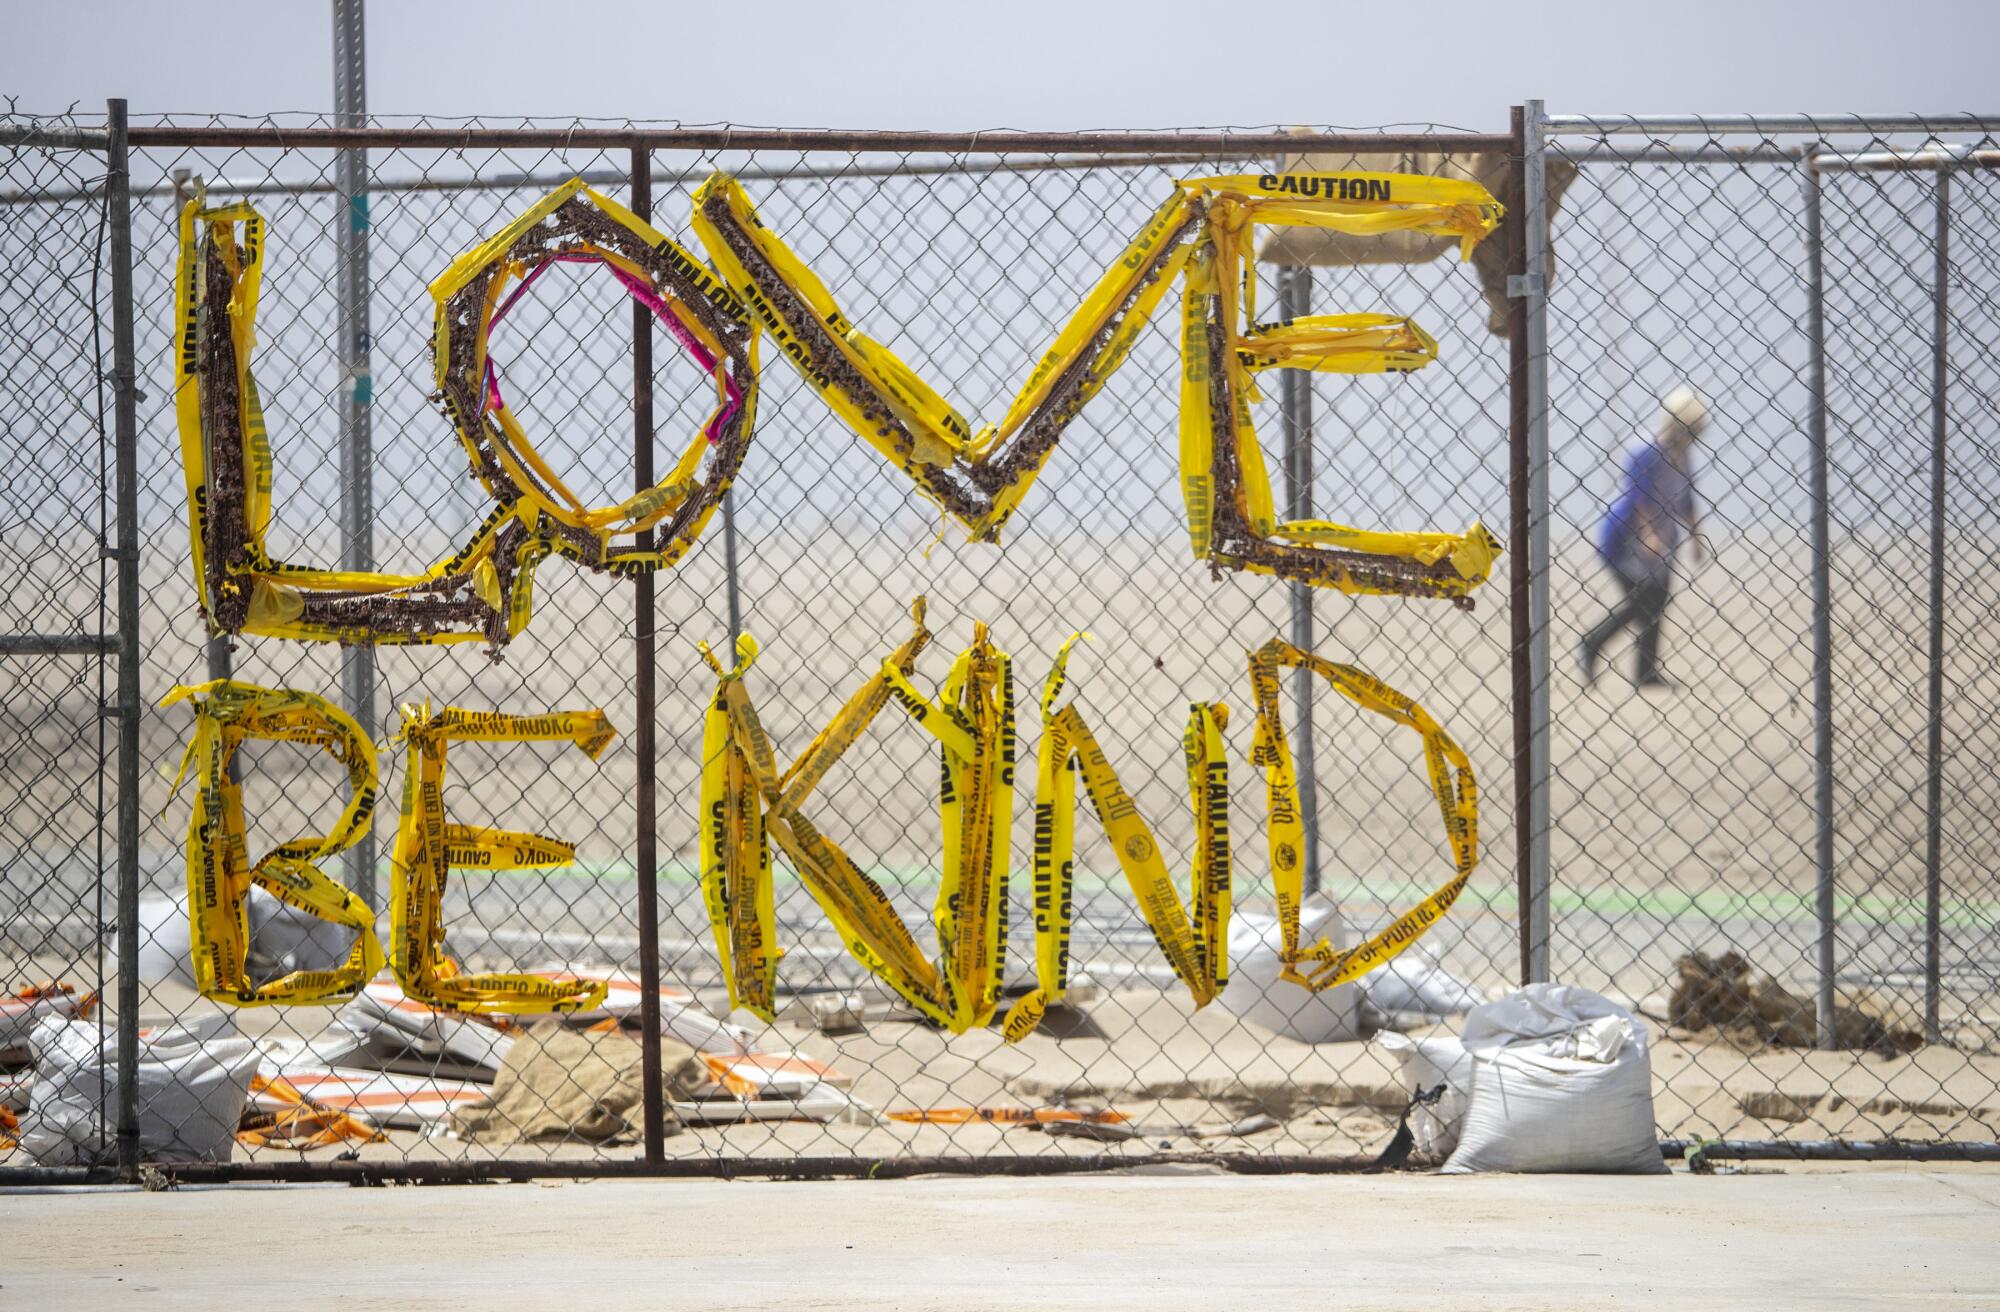 A message of positivity is woven with yellow police tape into a fence at a closed Venice beach.